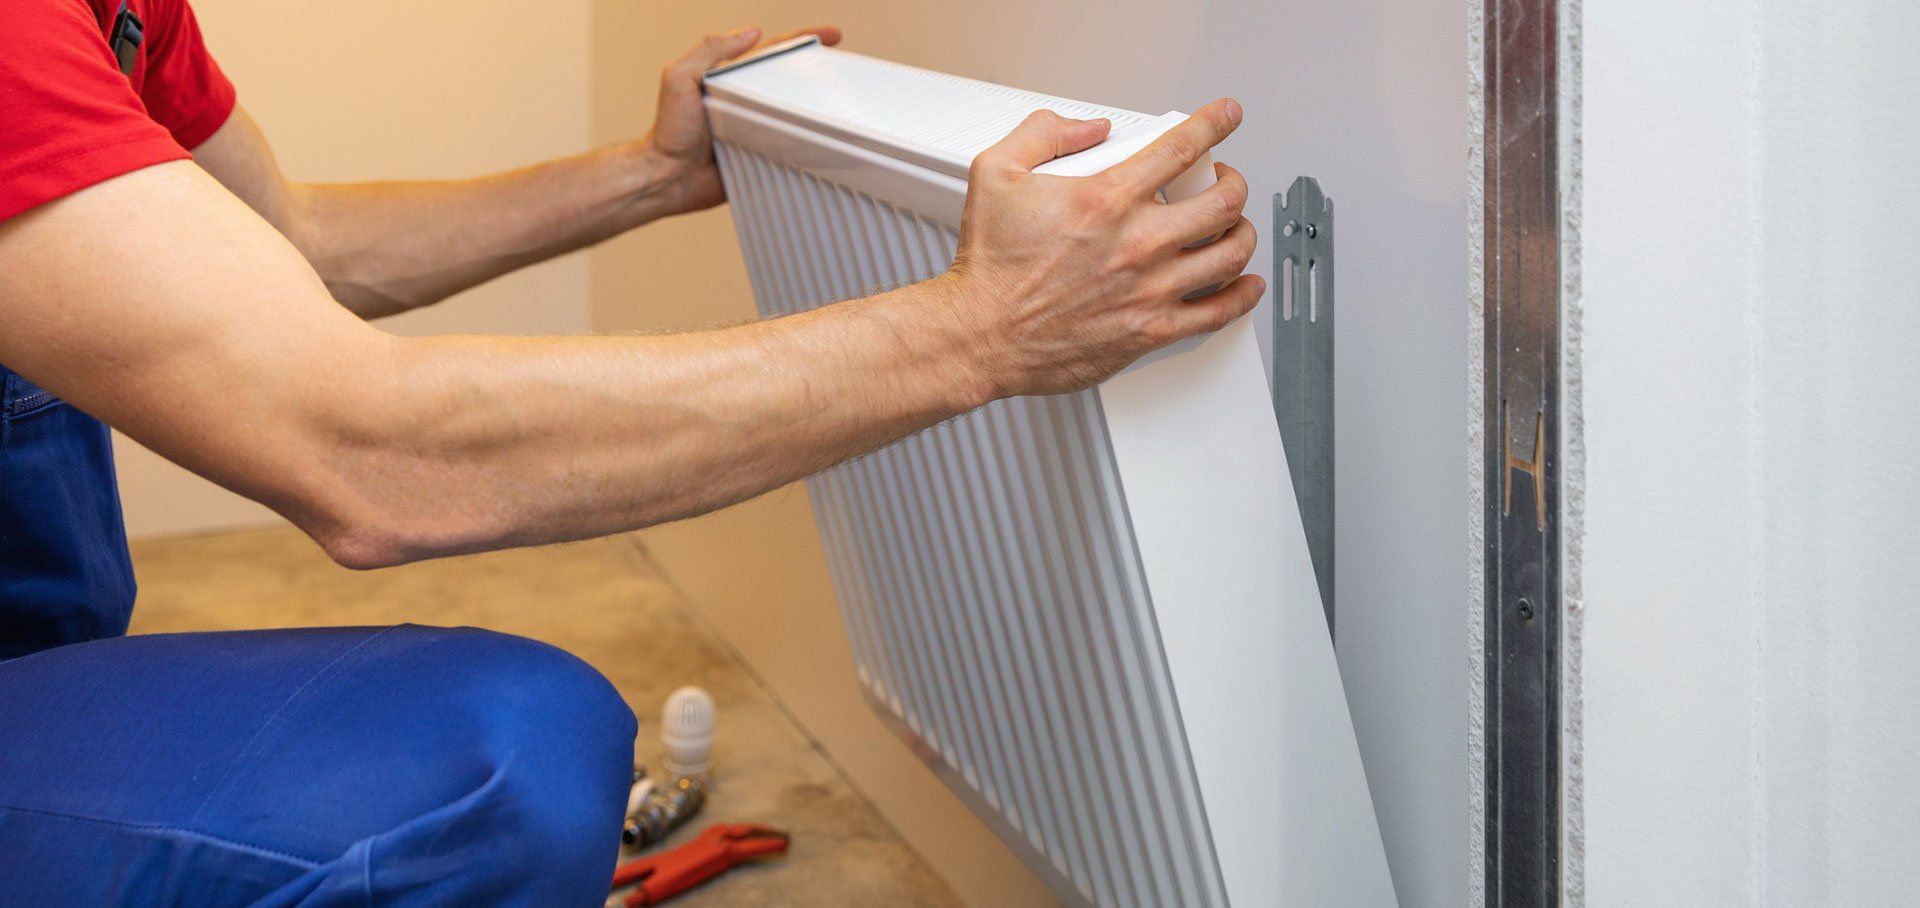 Man installing room heater on the wall